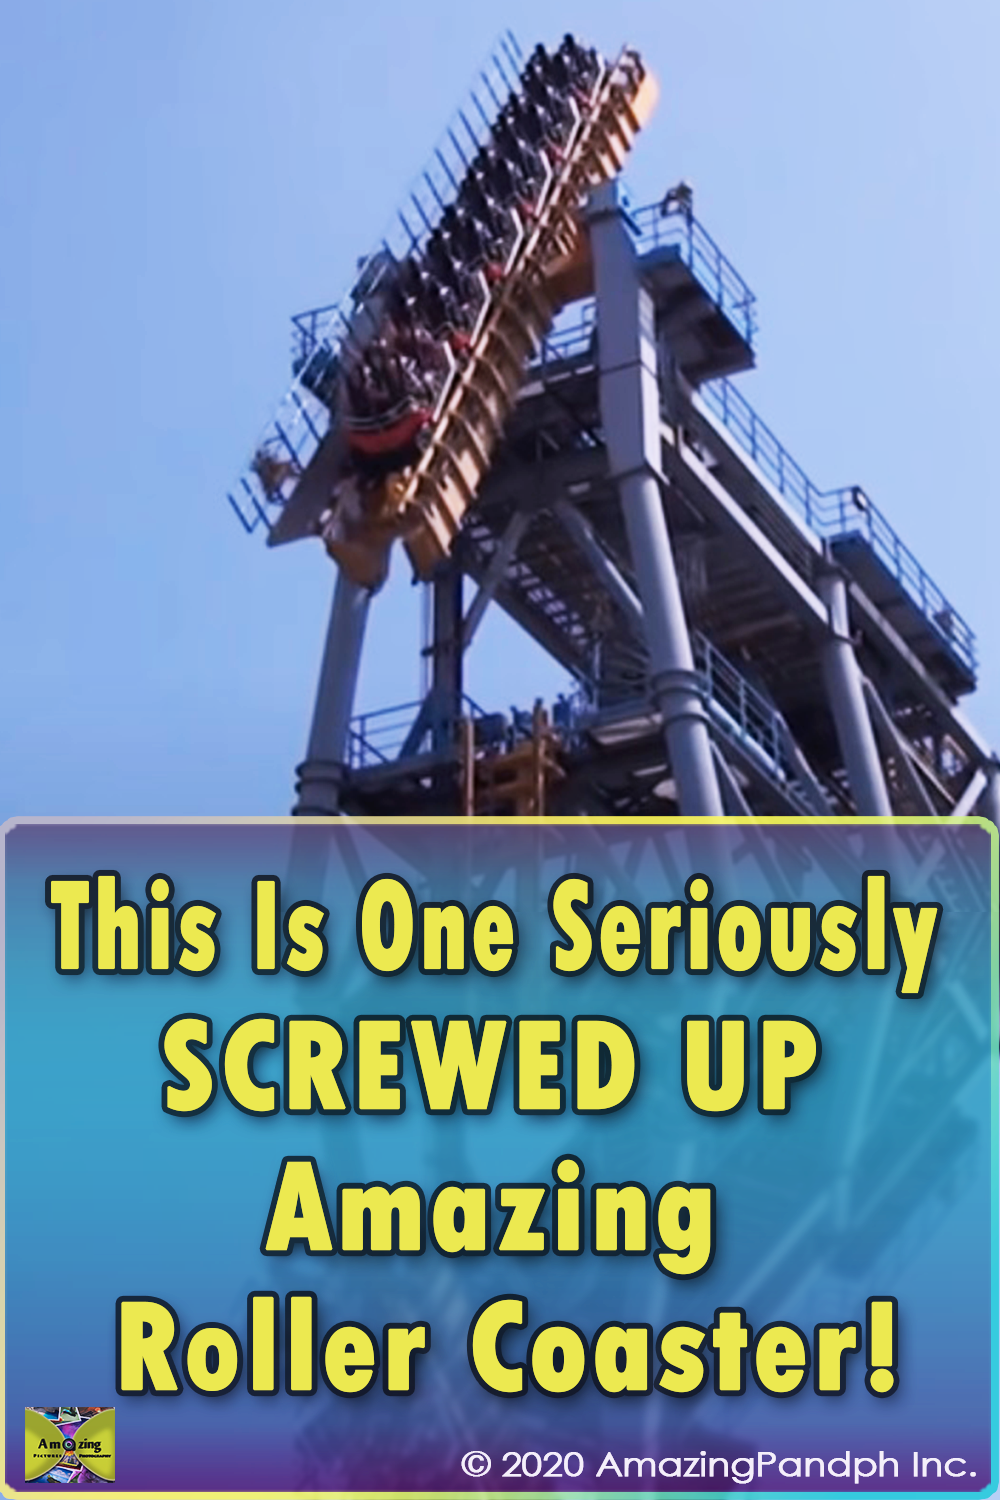 Seriously, Amazing Roller Coaster, Roller Coaster, Amazing, Serious, scariest, scary,